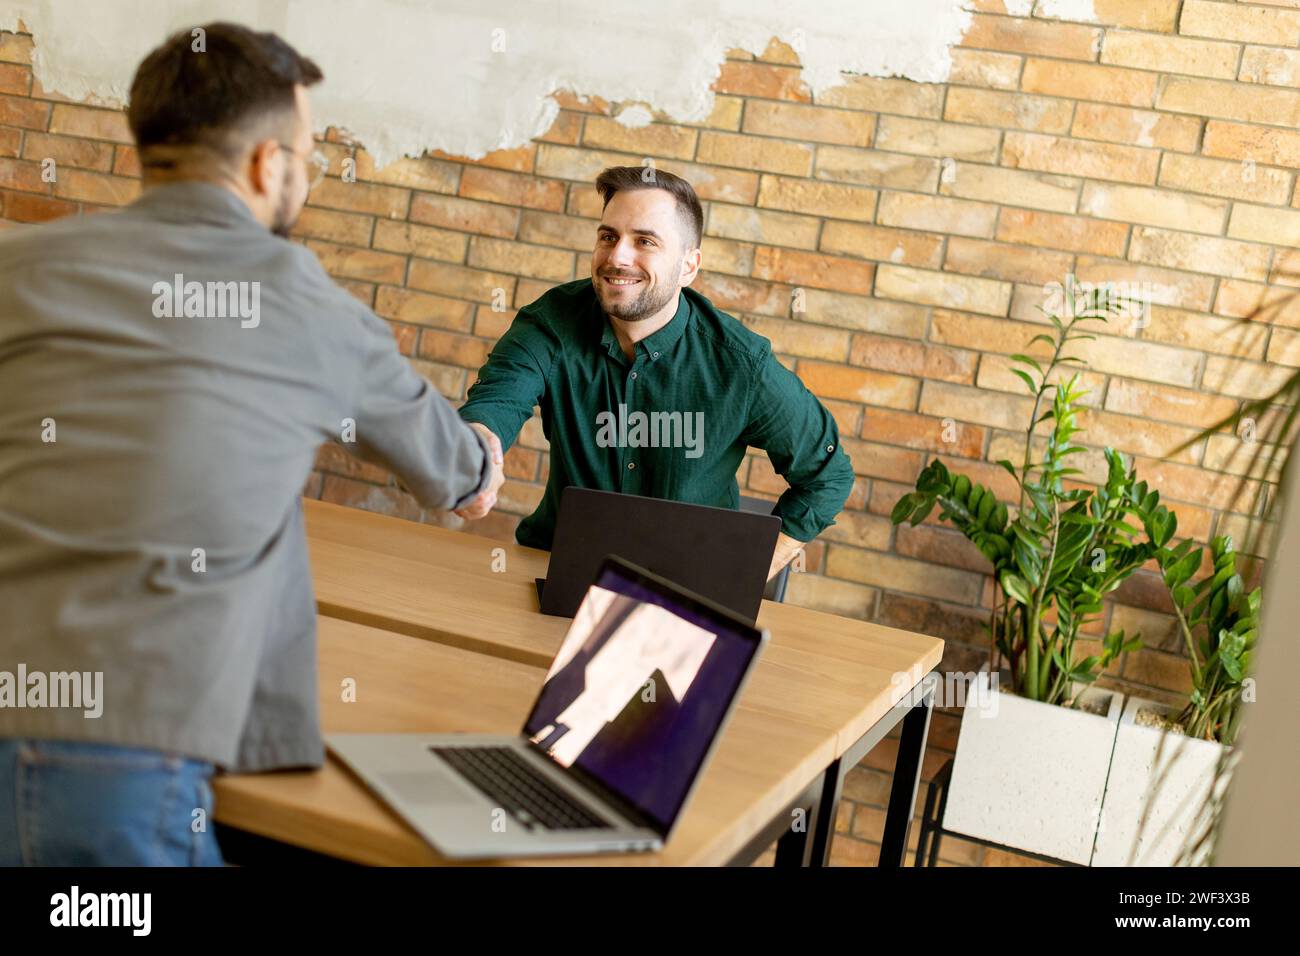 Two professionals engage in a welcoming handshake across a wooden table adorned with laptops, signaling a successful meeting or partnership in a conte Stock Photo